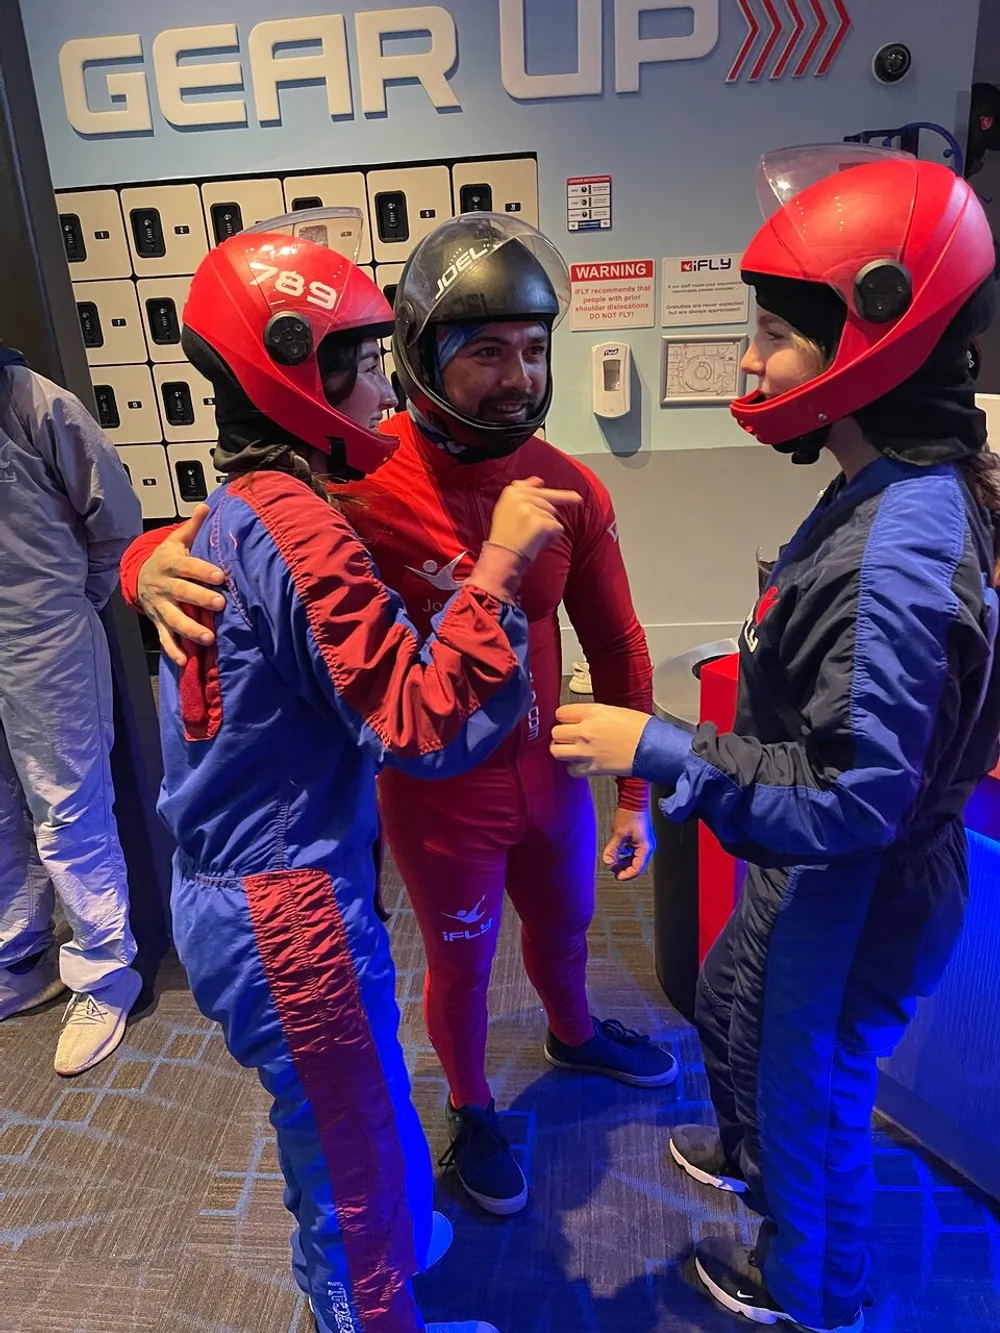 Three individuals wearing flight suits and helmets appear to be in a lively conversation before an indoor skydiving experience with lockers and flight gear instructions visible in the background